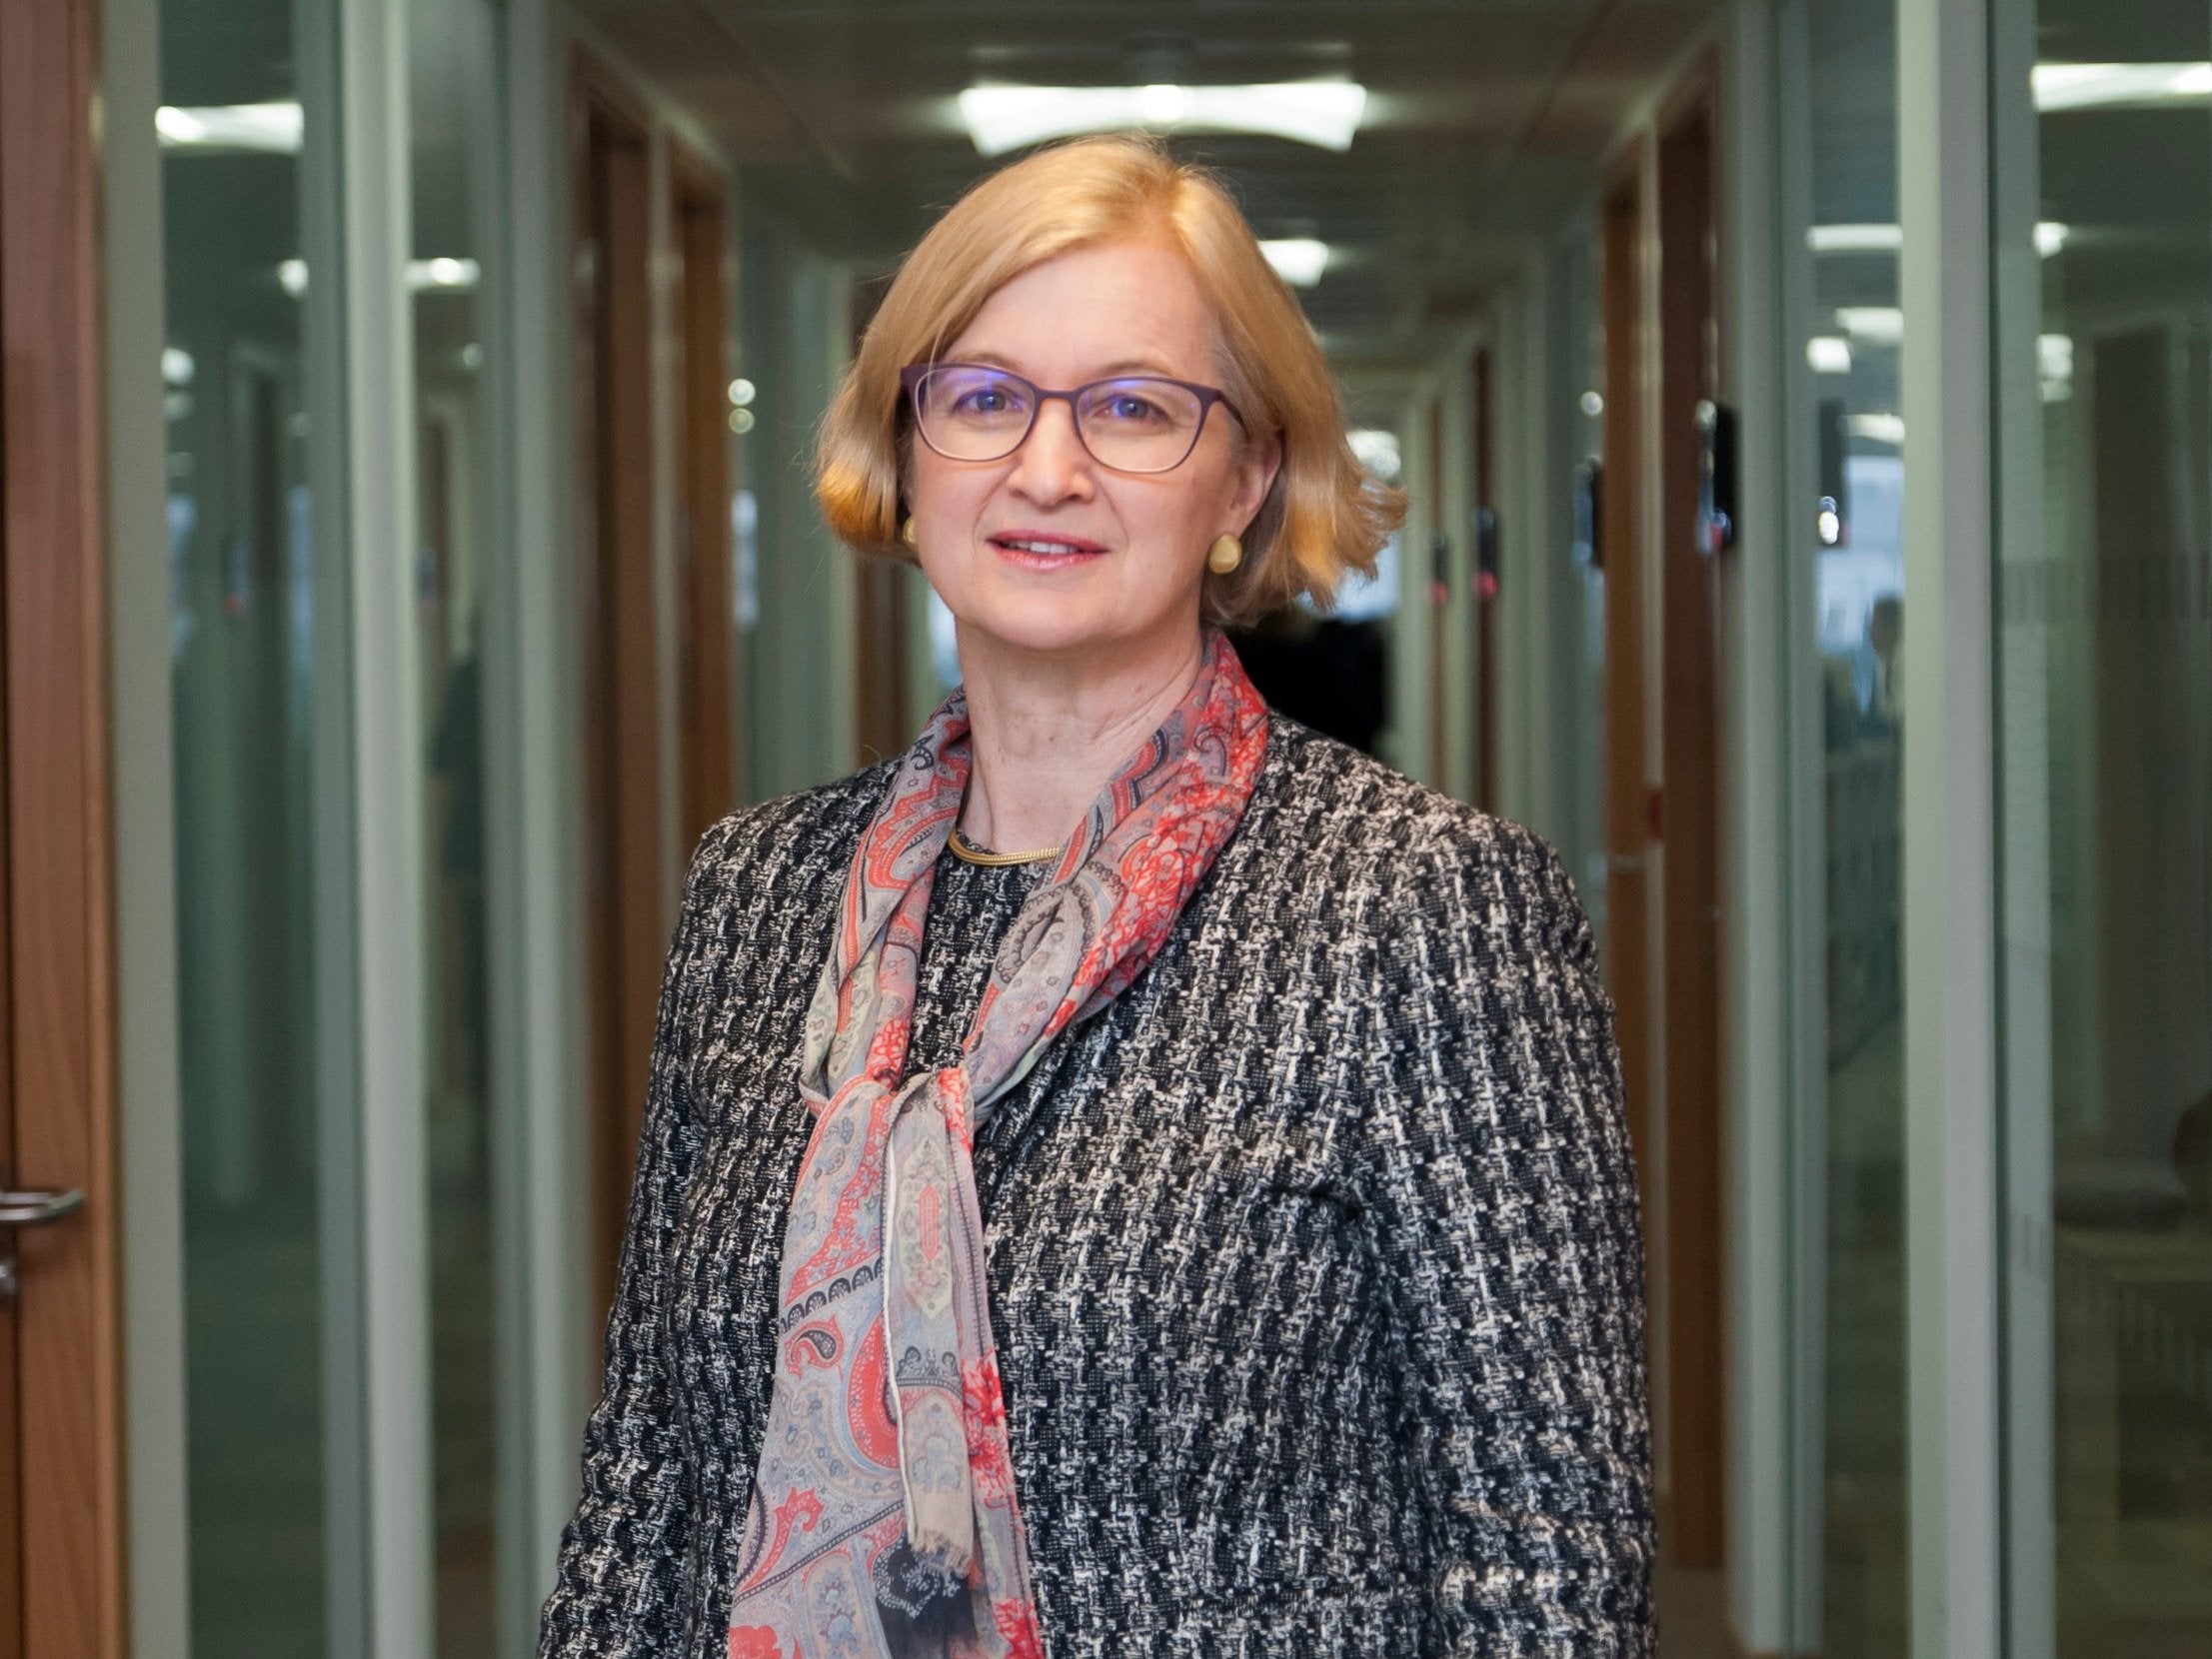 Amanda Spielman, Ofsted boss, has called on the government to take urgent action